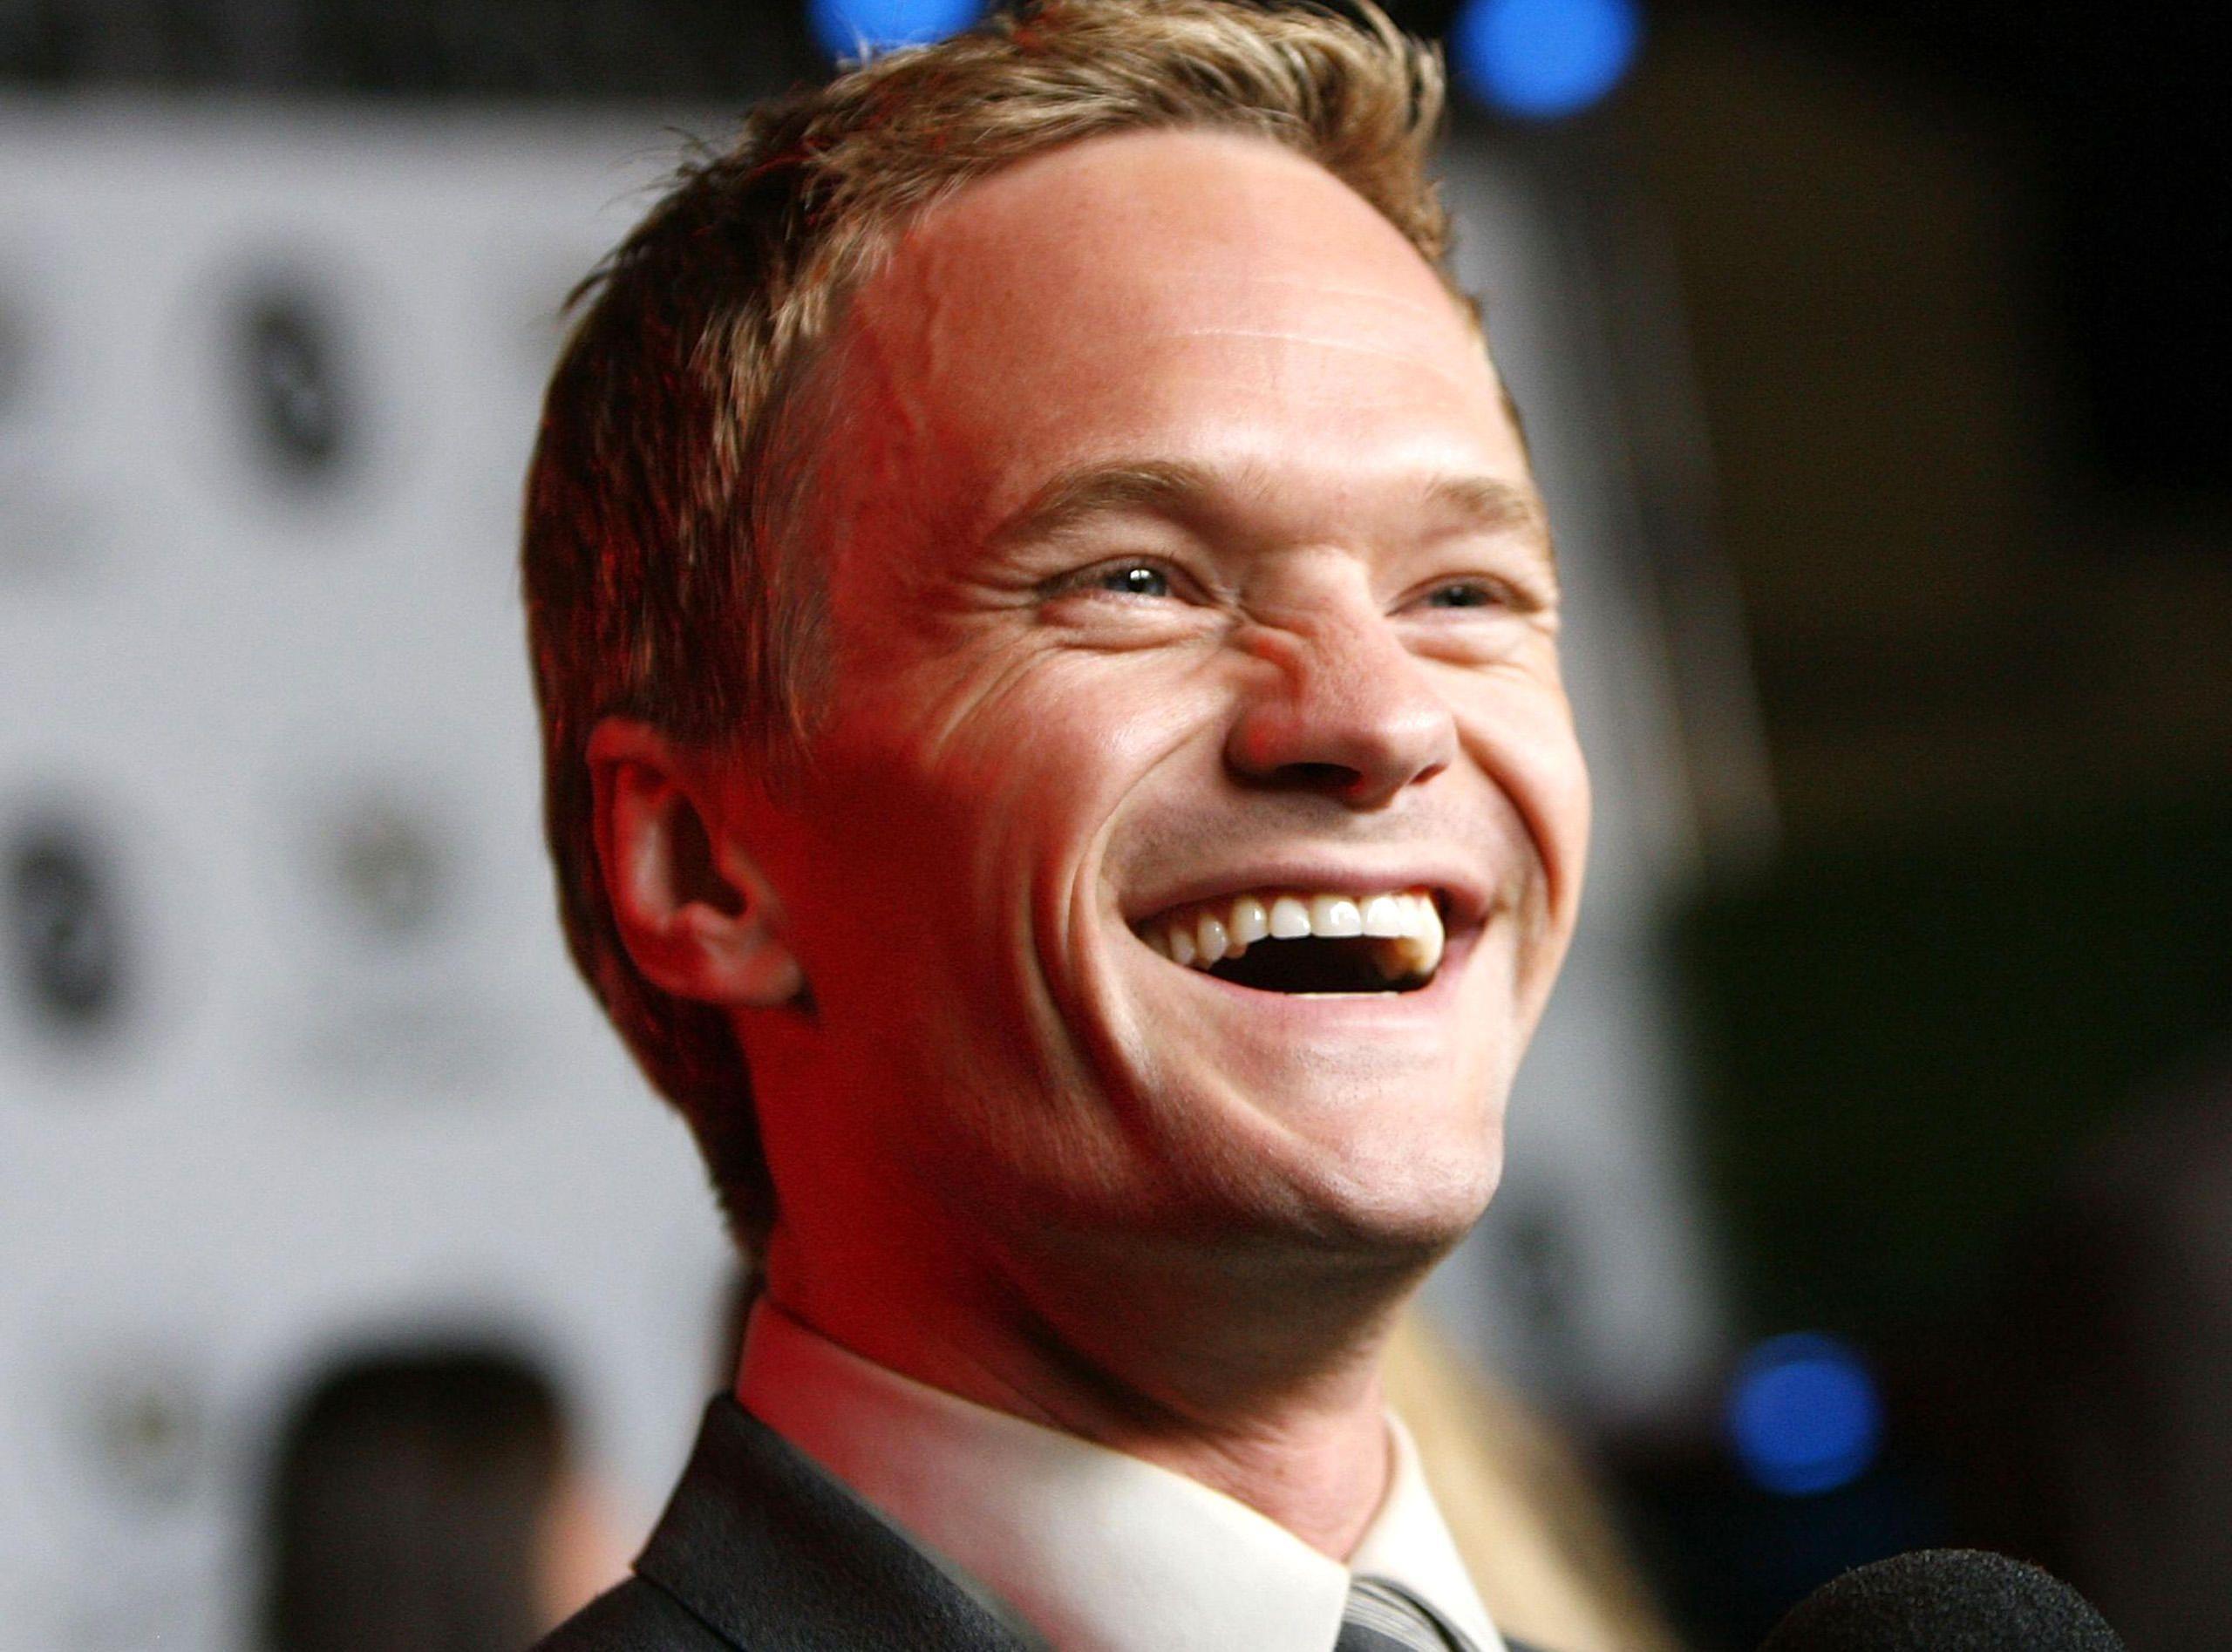 New Neil Patrick Harris HD Image Picture Wallpaper. Cariwall